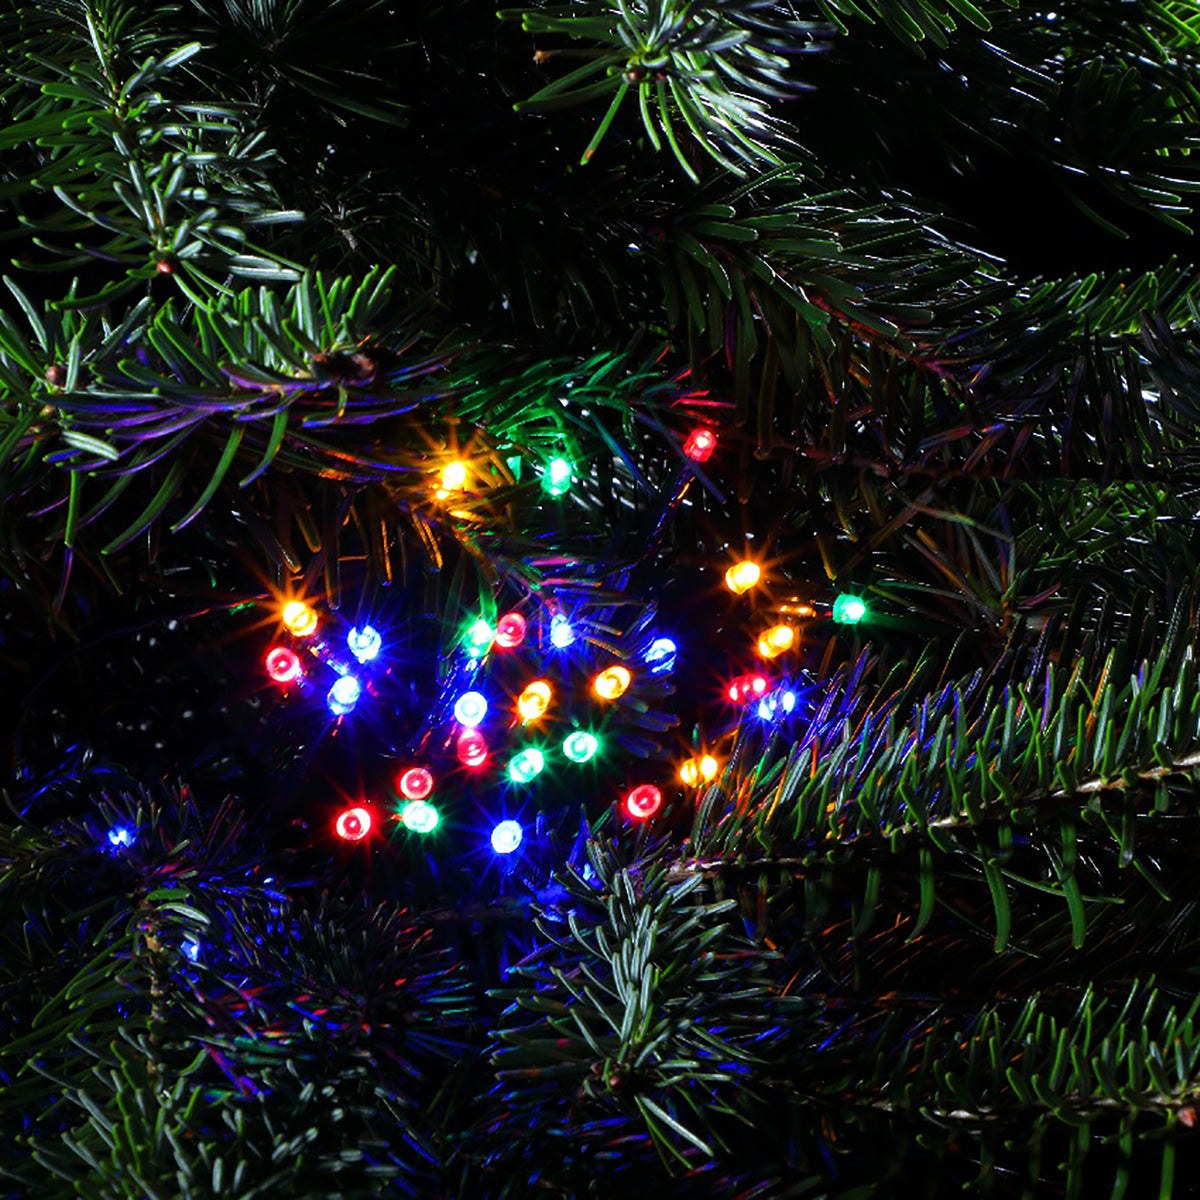 Noma Christmas 120, 240, 360, 480, 720, 1000 Multifunction Lights with Green Cable- Multicolour